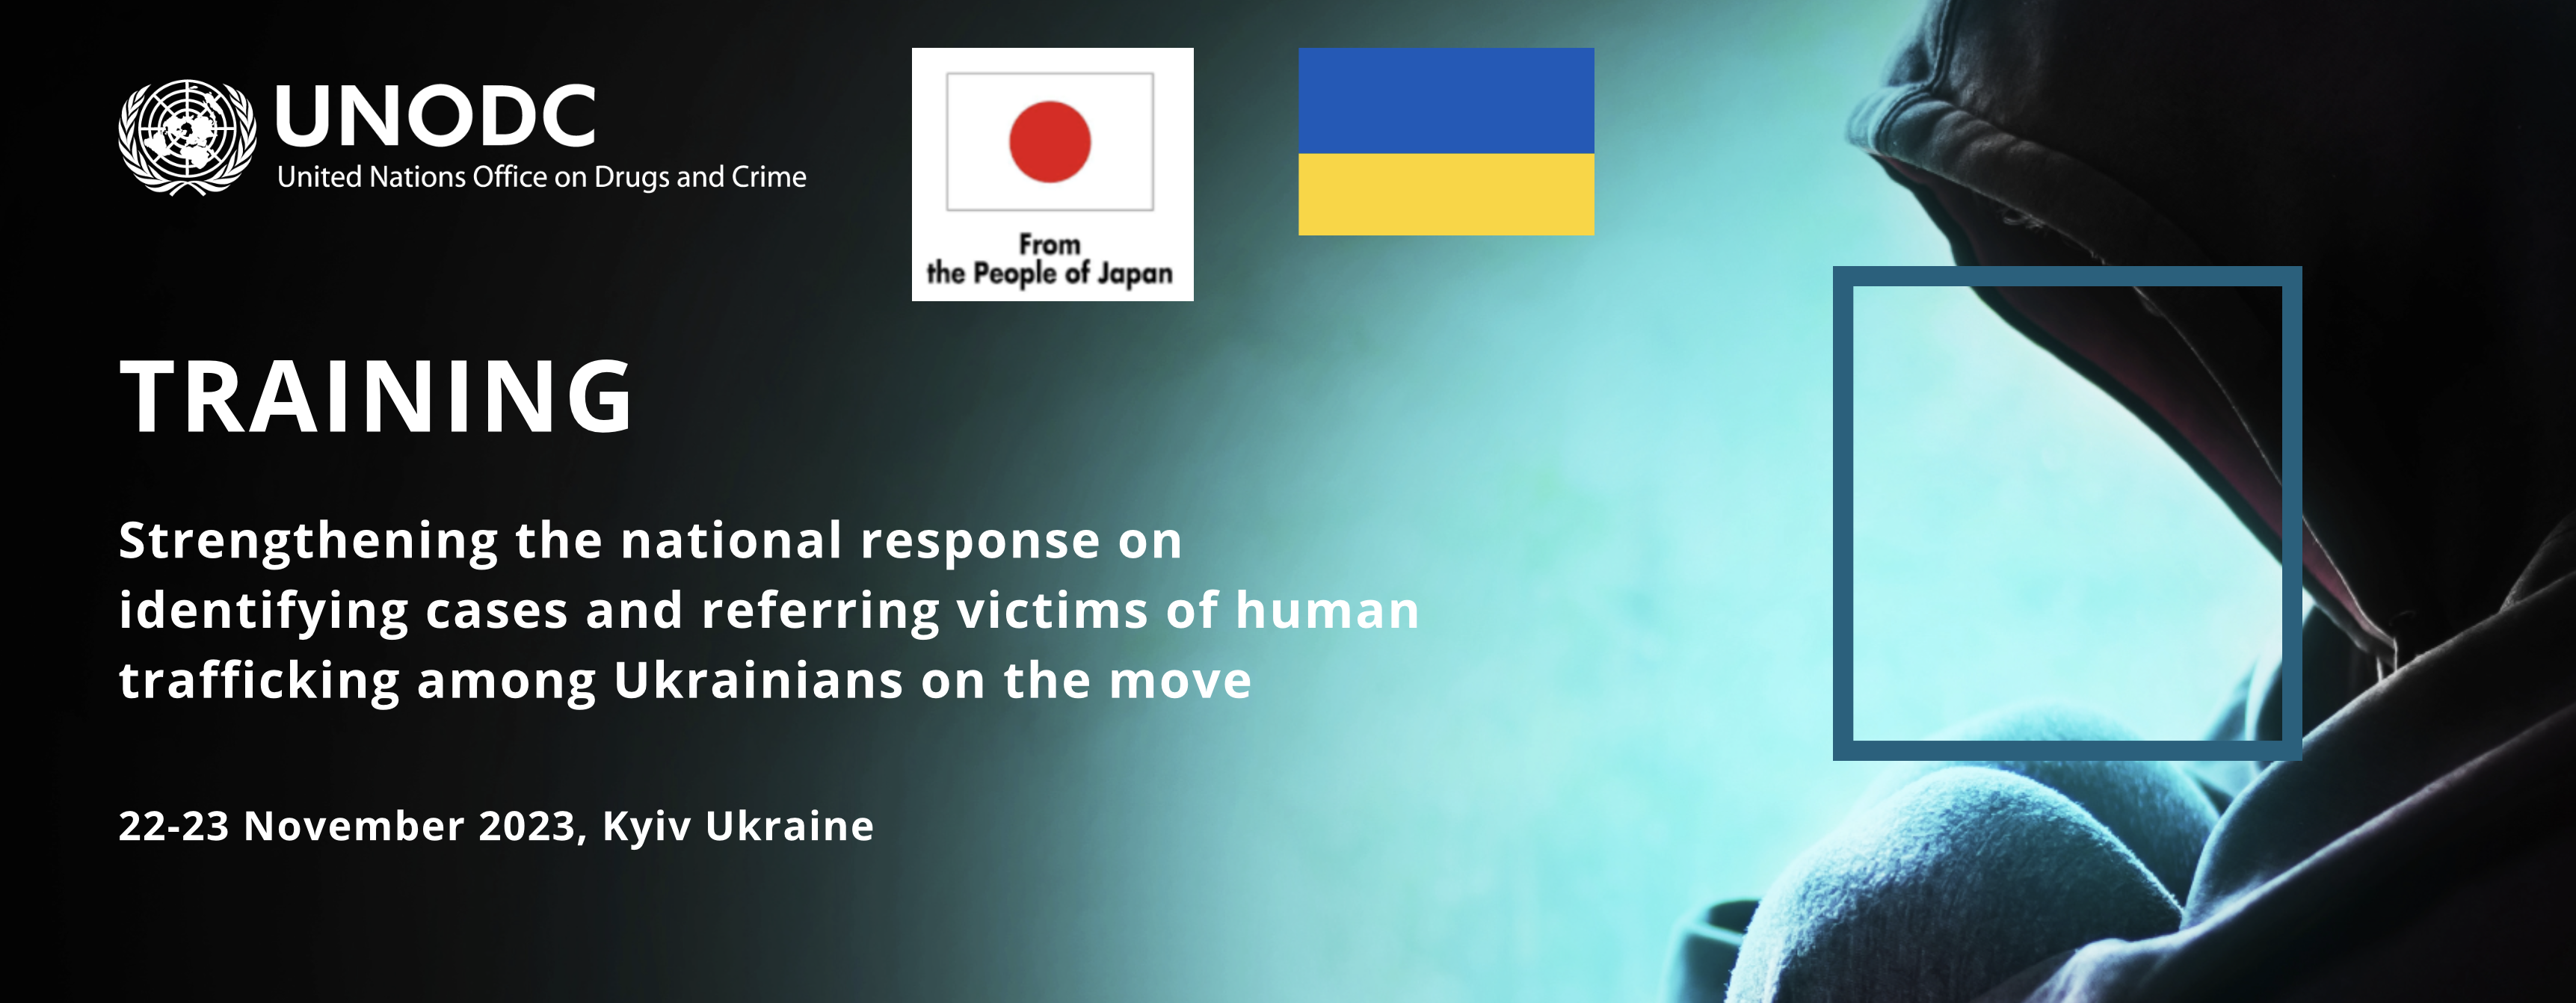 Webstory: Strengthening the national response on identifying cases and referring victims of human trafficking  among Ukrainians on the move